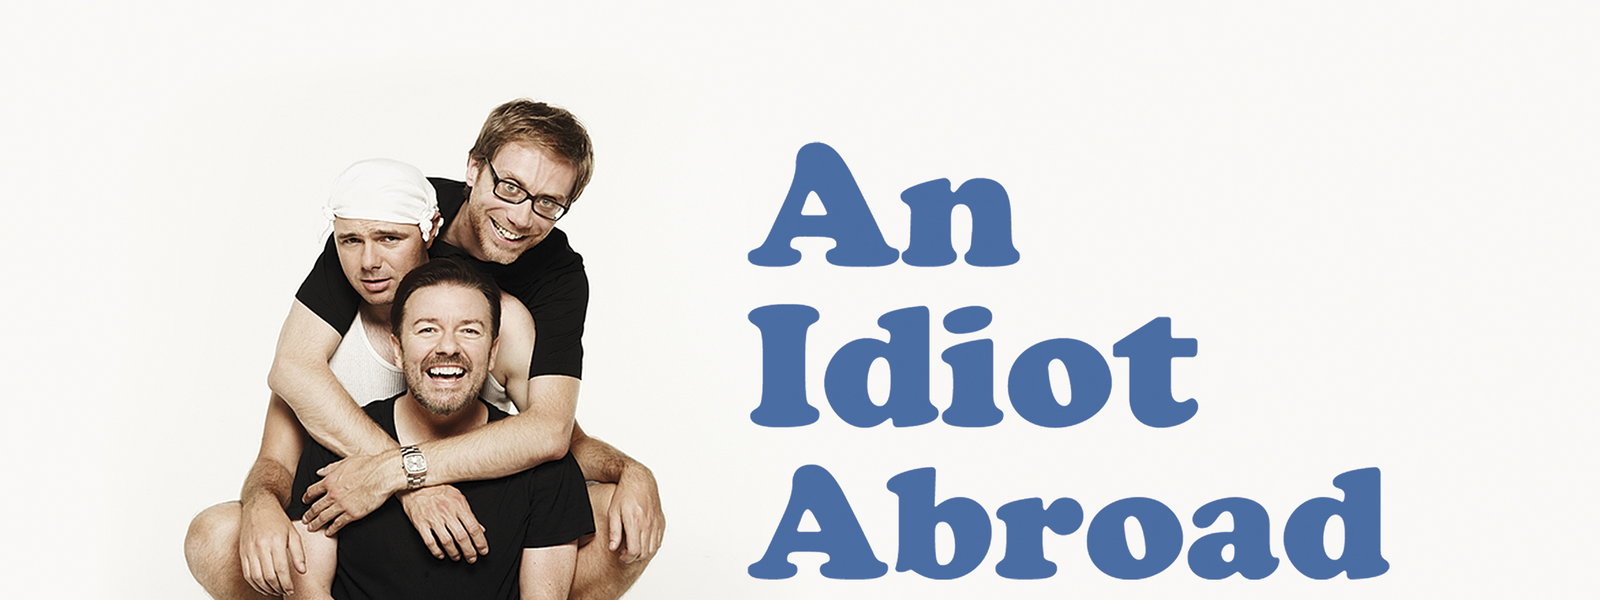 An Idiot Abroad Netflix Release Date, Plot, And Cast